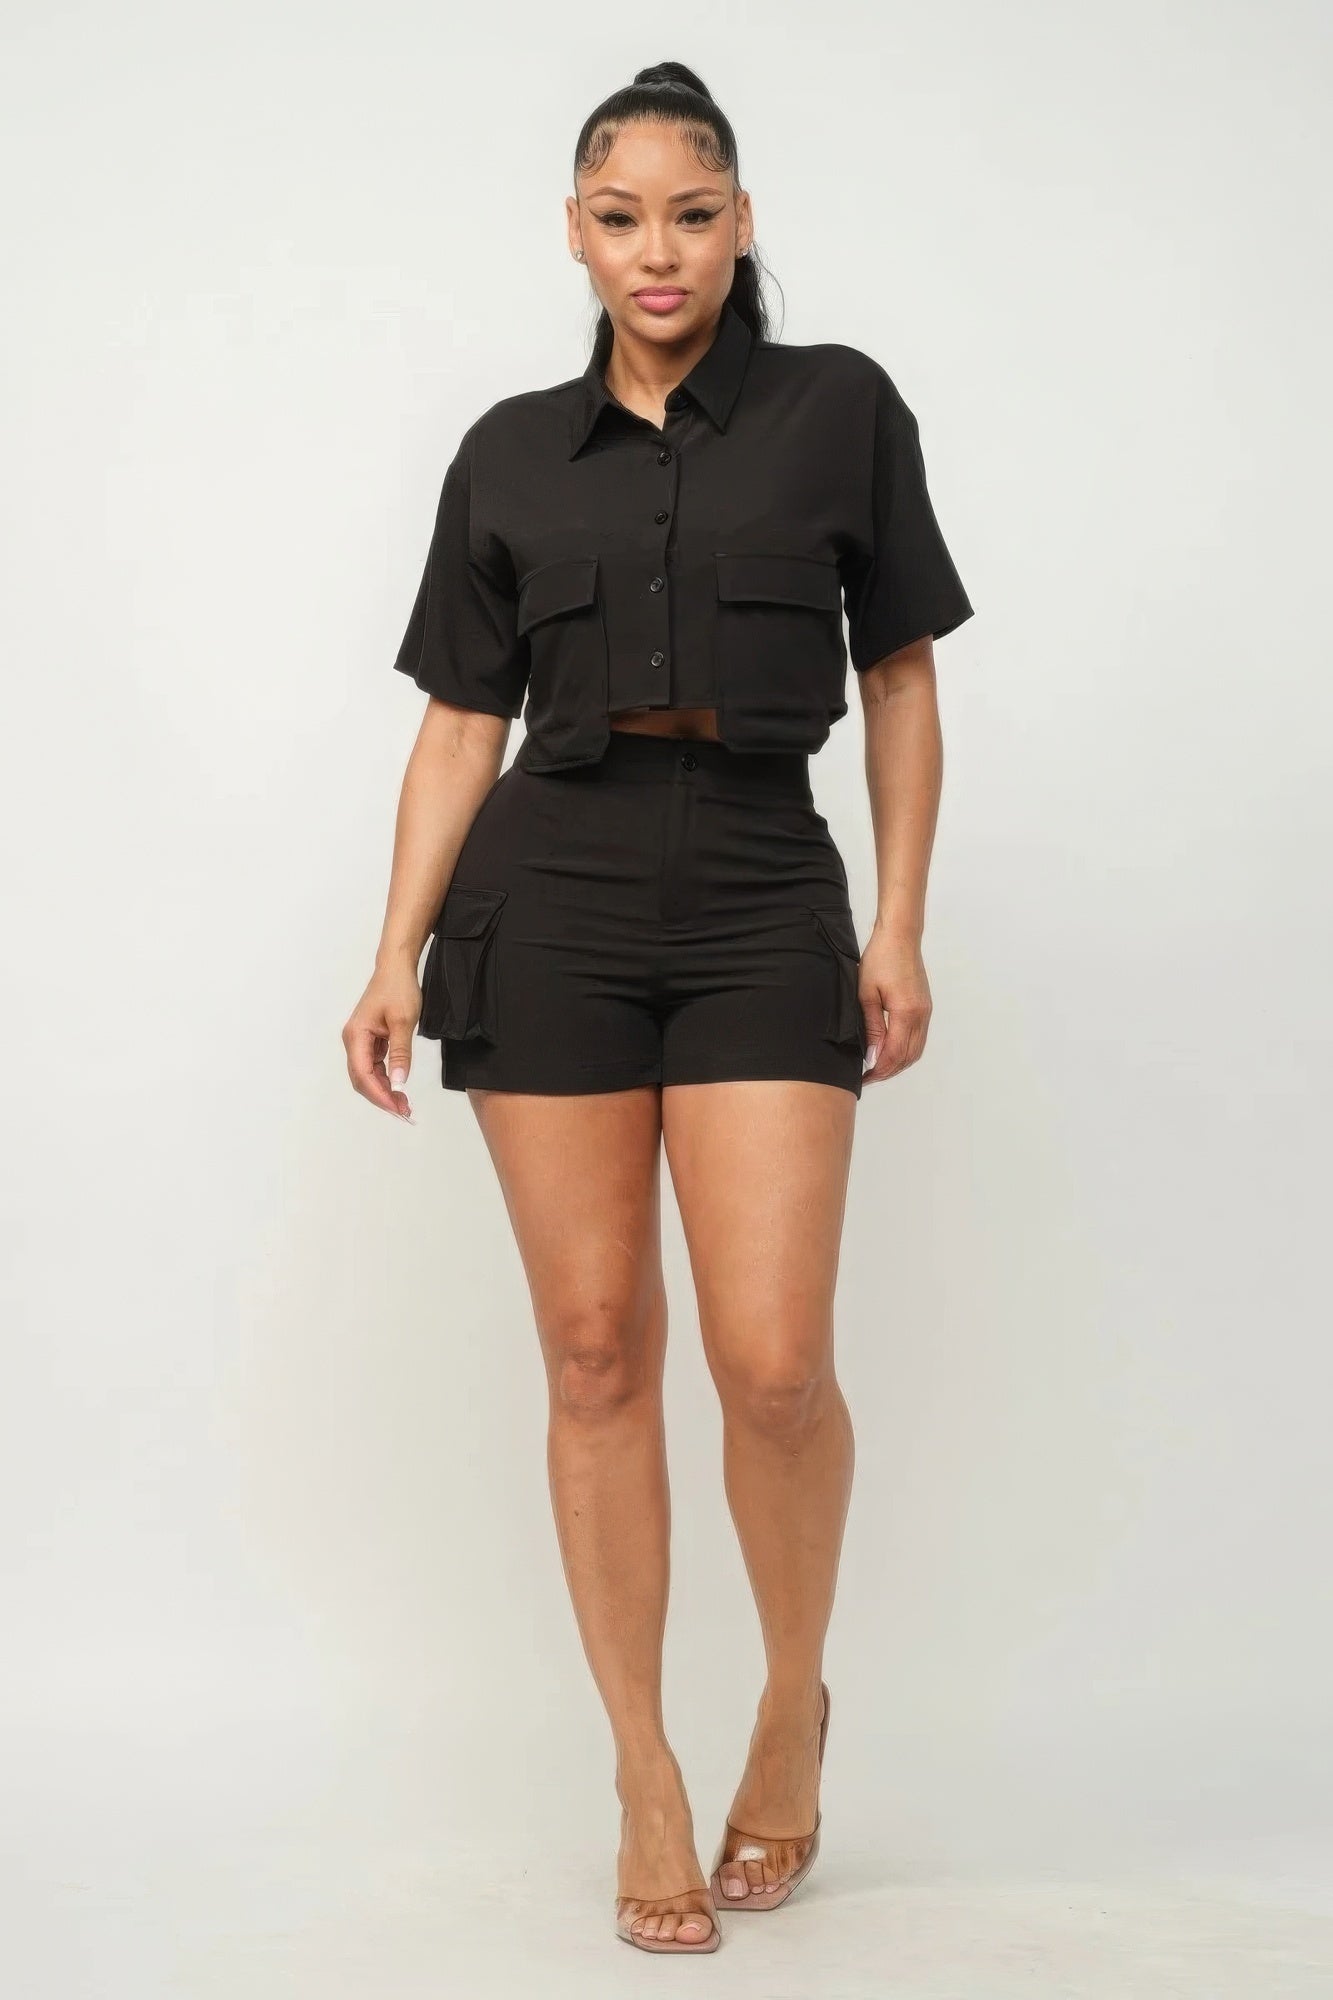 CARGO Pocket Top And Shorts Set (4 Colors)